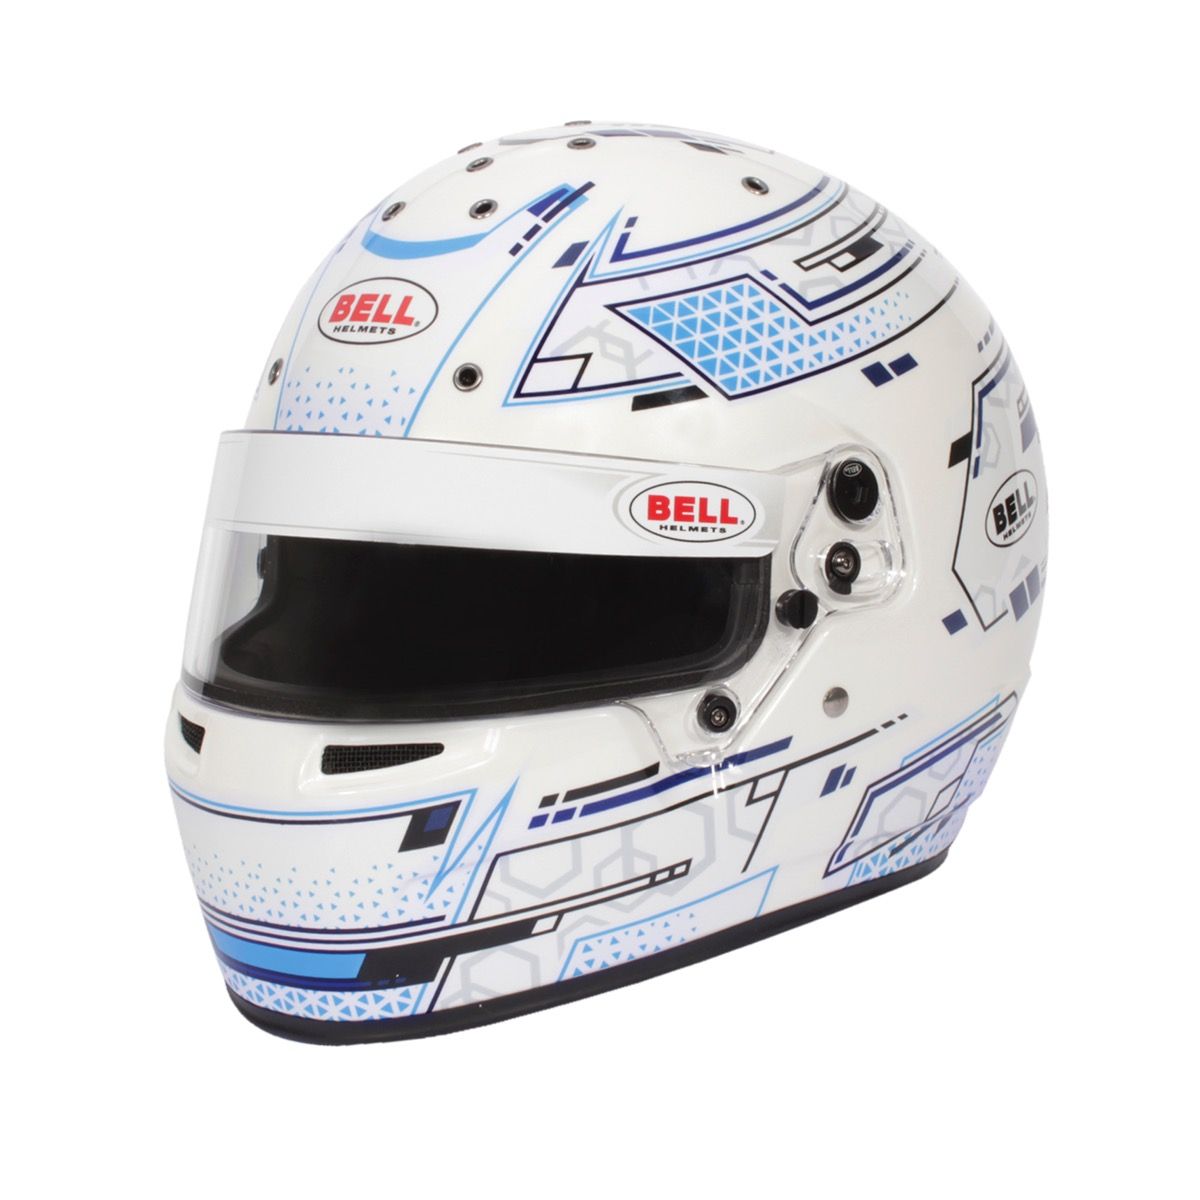 Bell Helmets - Bell RS7-K - Helmet Excellence in Racing Safety